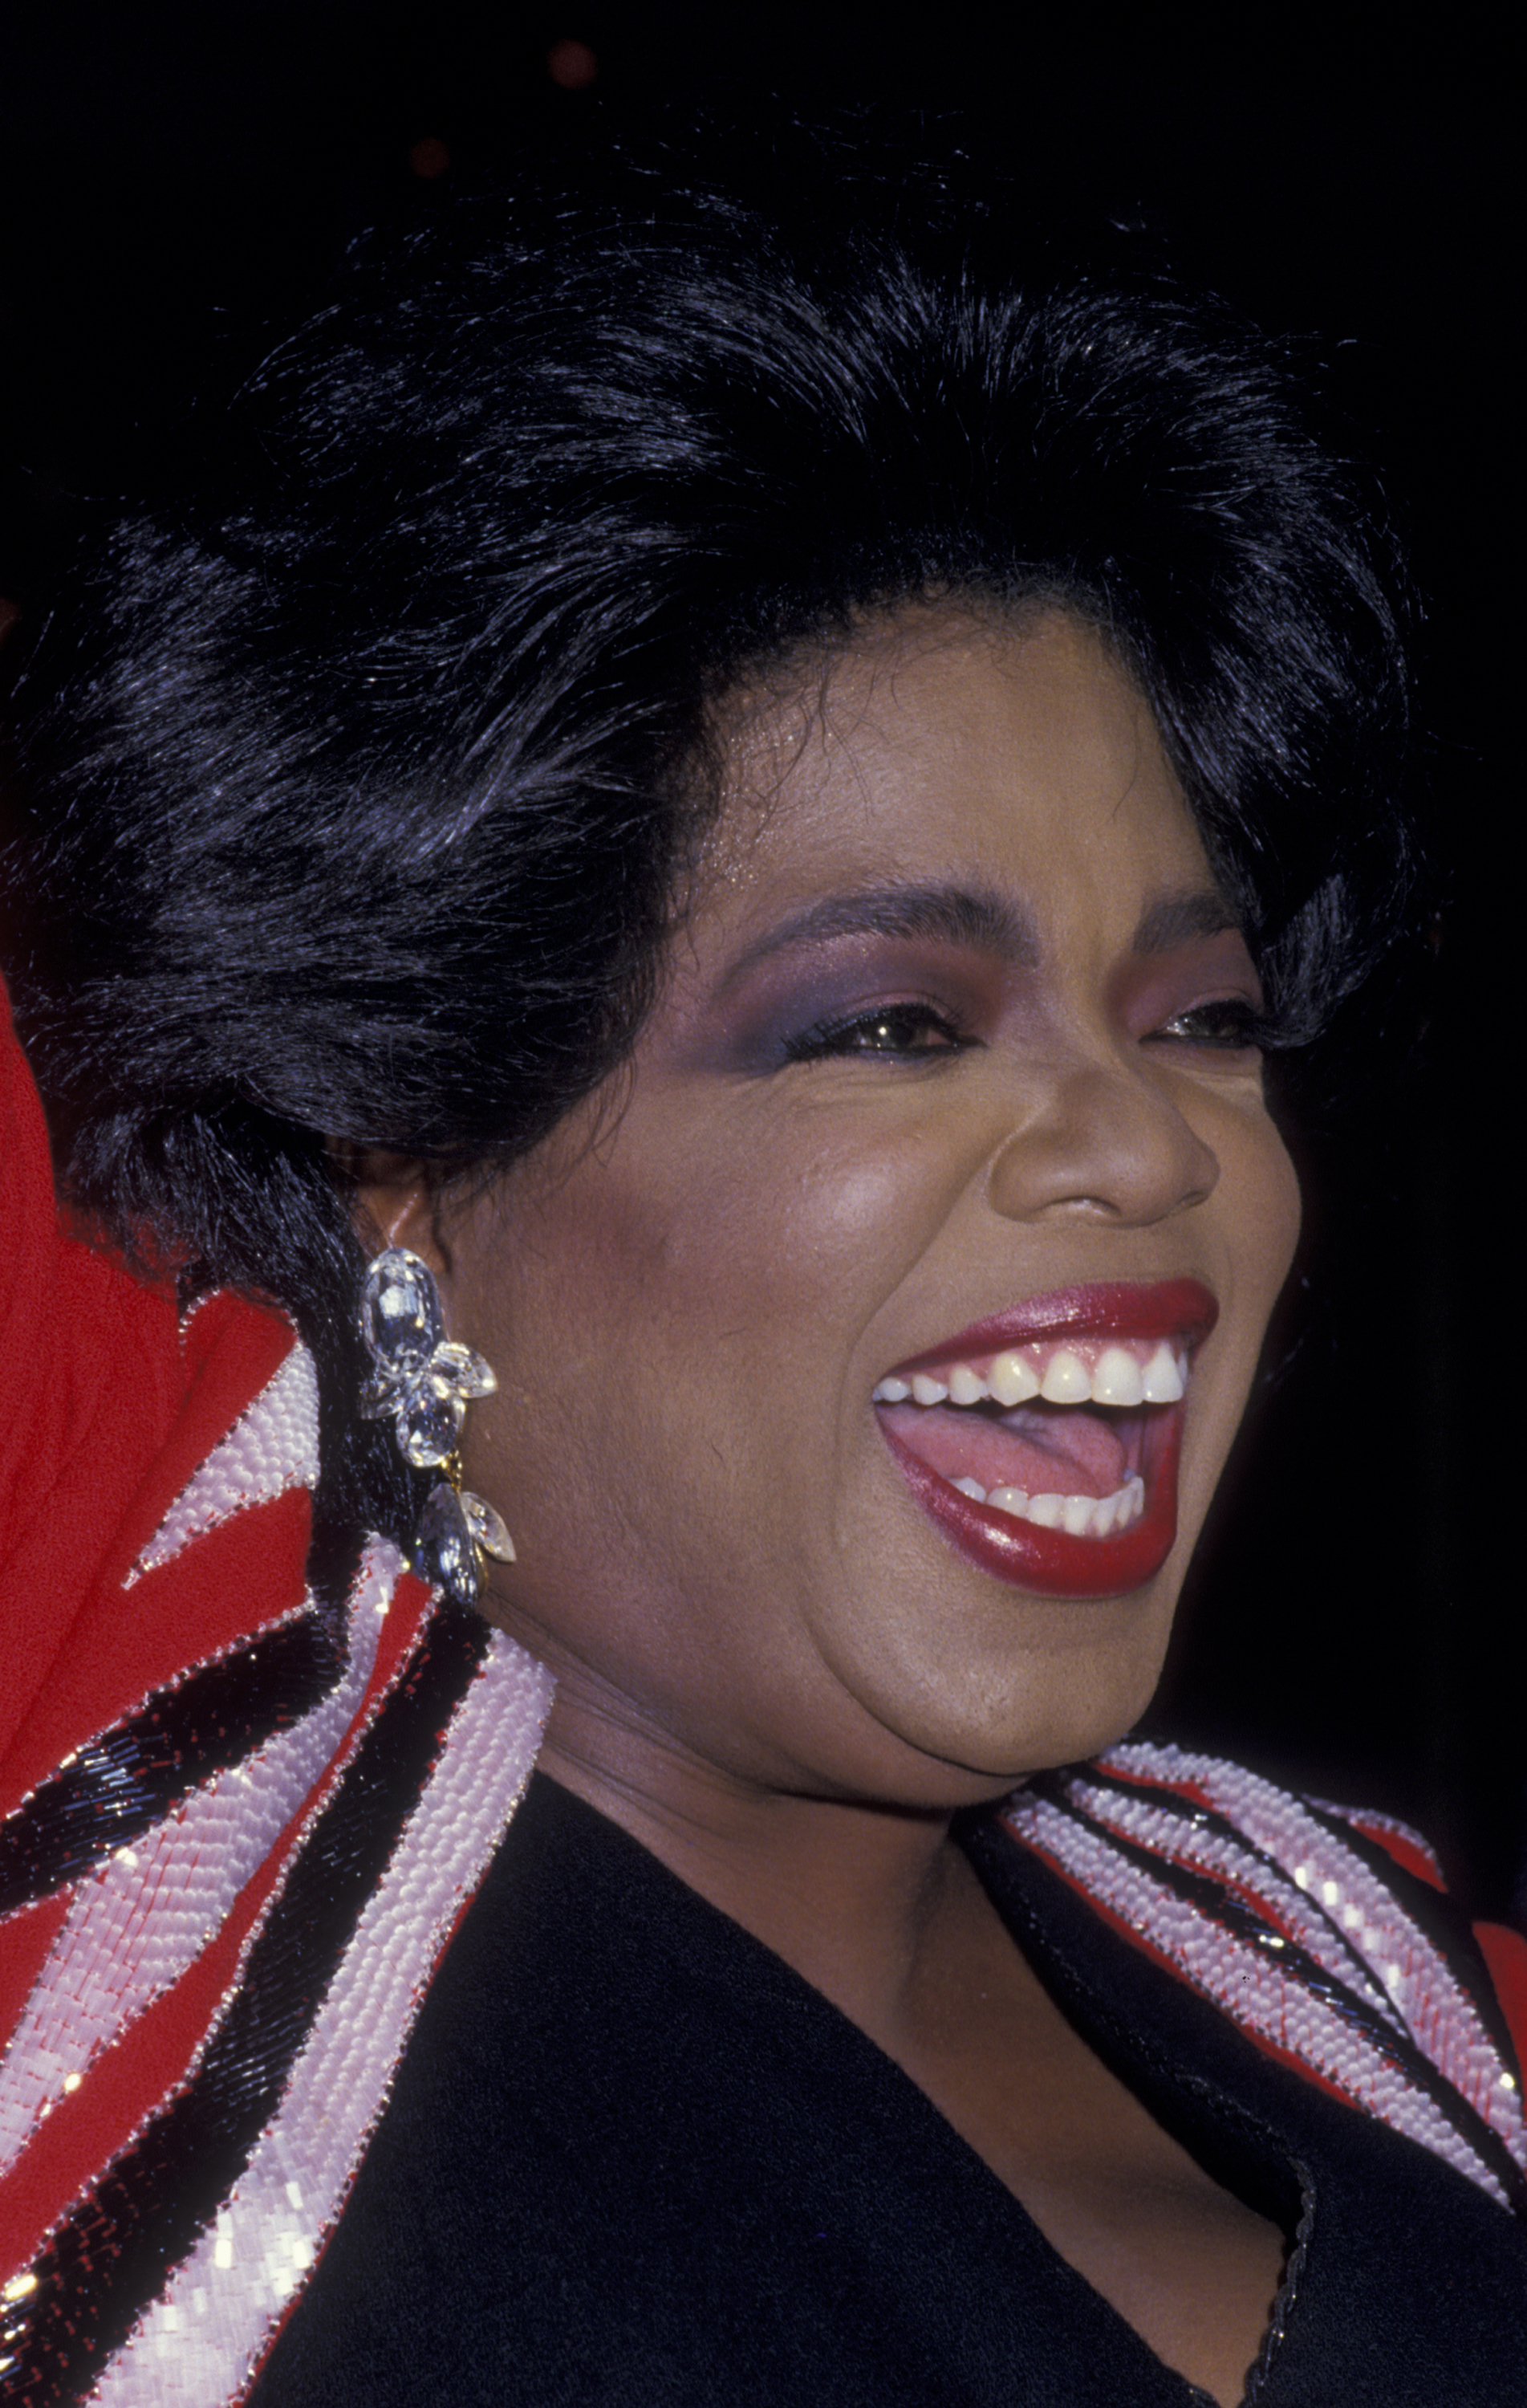 Oprah Winfrey at the 14th Annual Daytime Emmy Awards in New York City, 1987 | Source: Getty Images